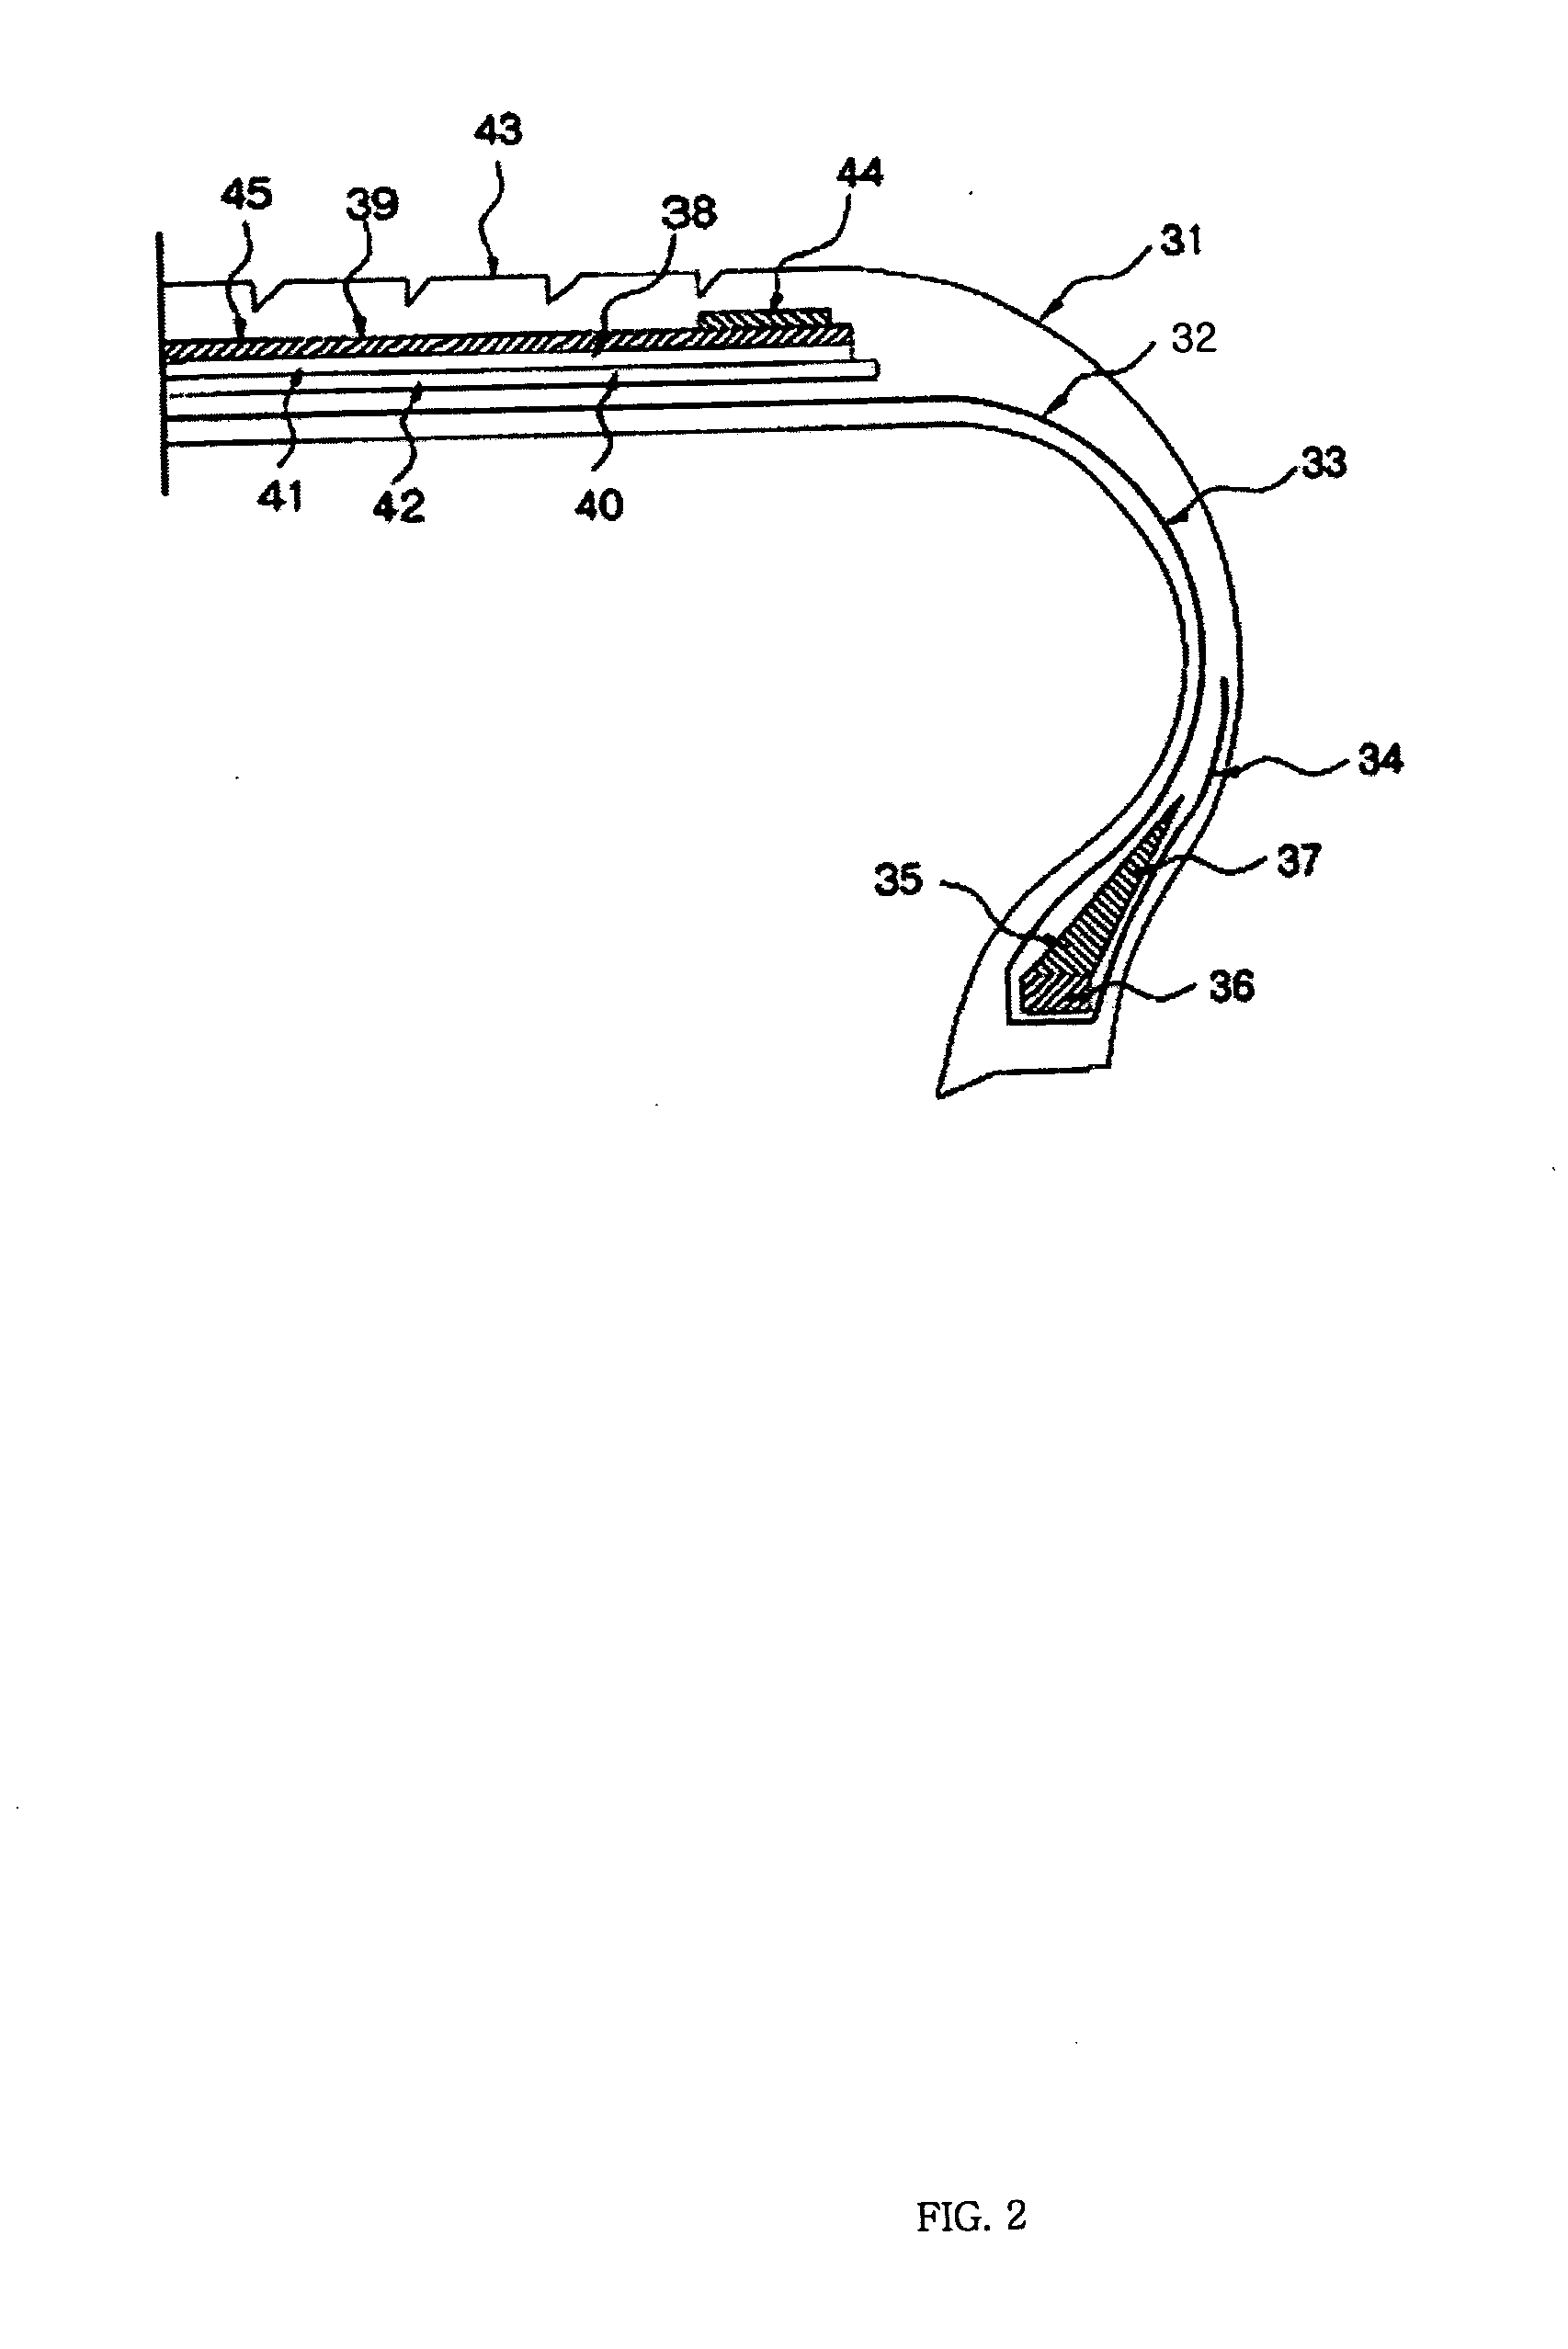 Dipped cord using hybrid cord and a radial tire using the same